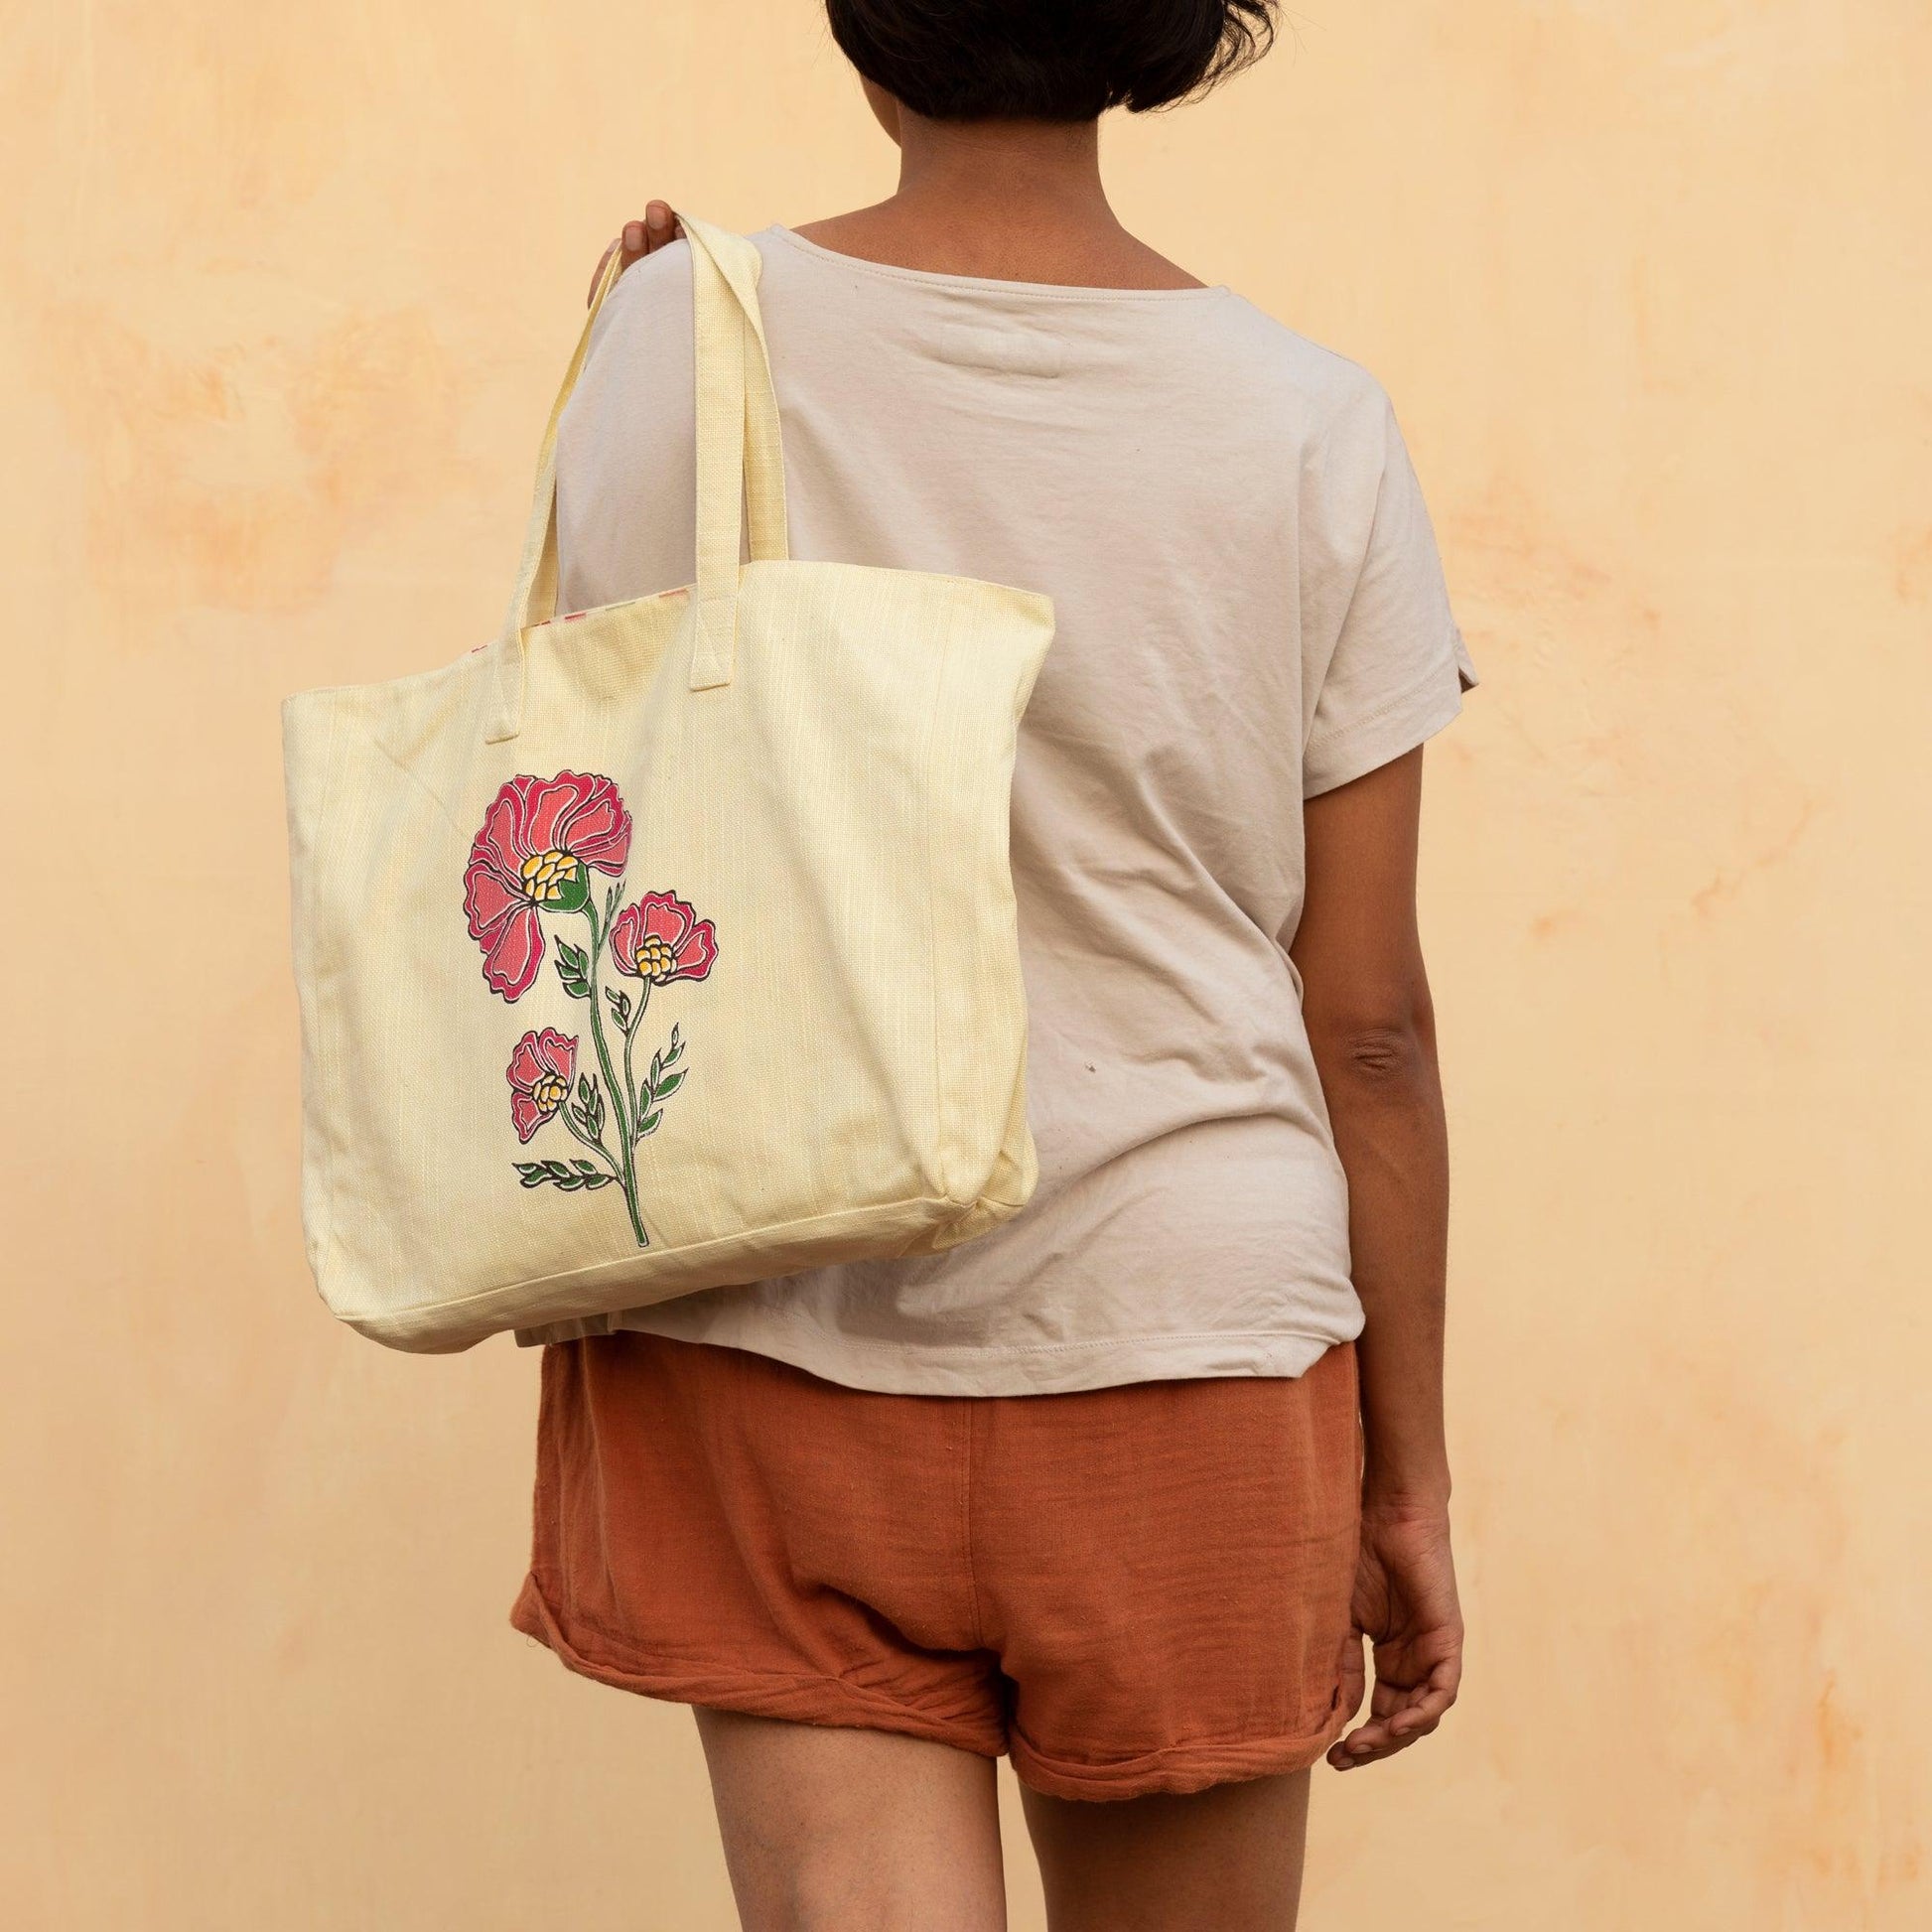 recycled tote bags